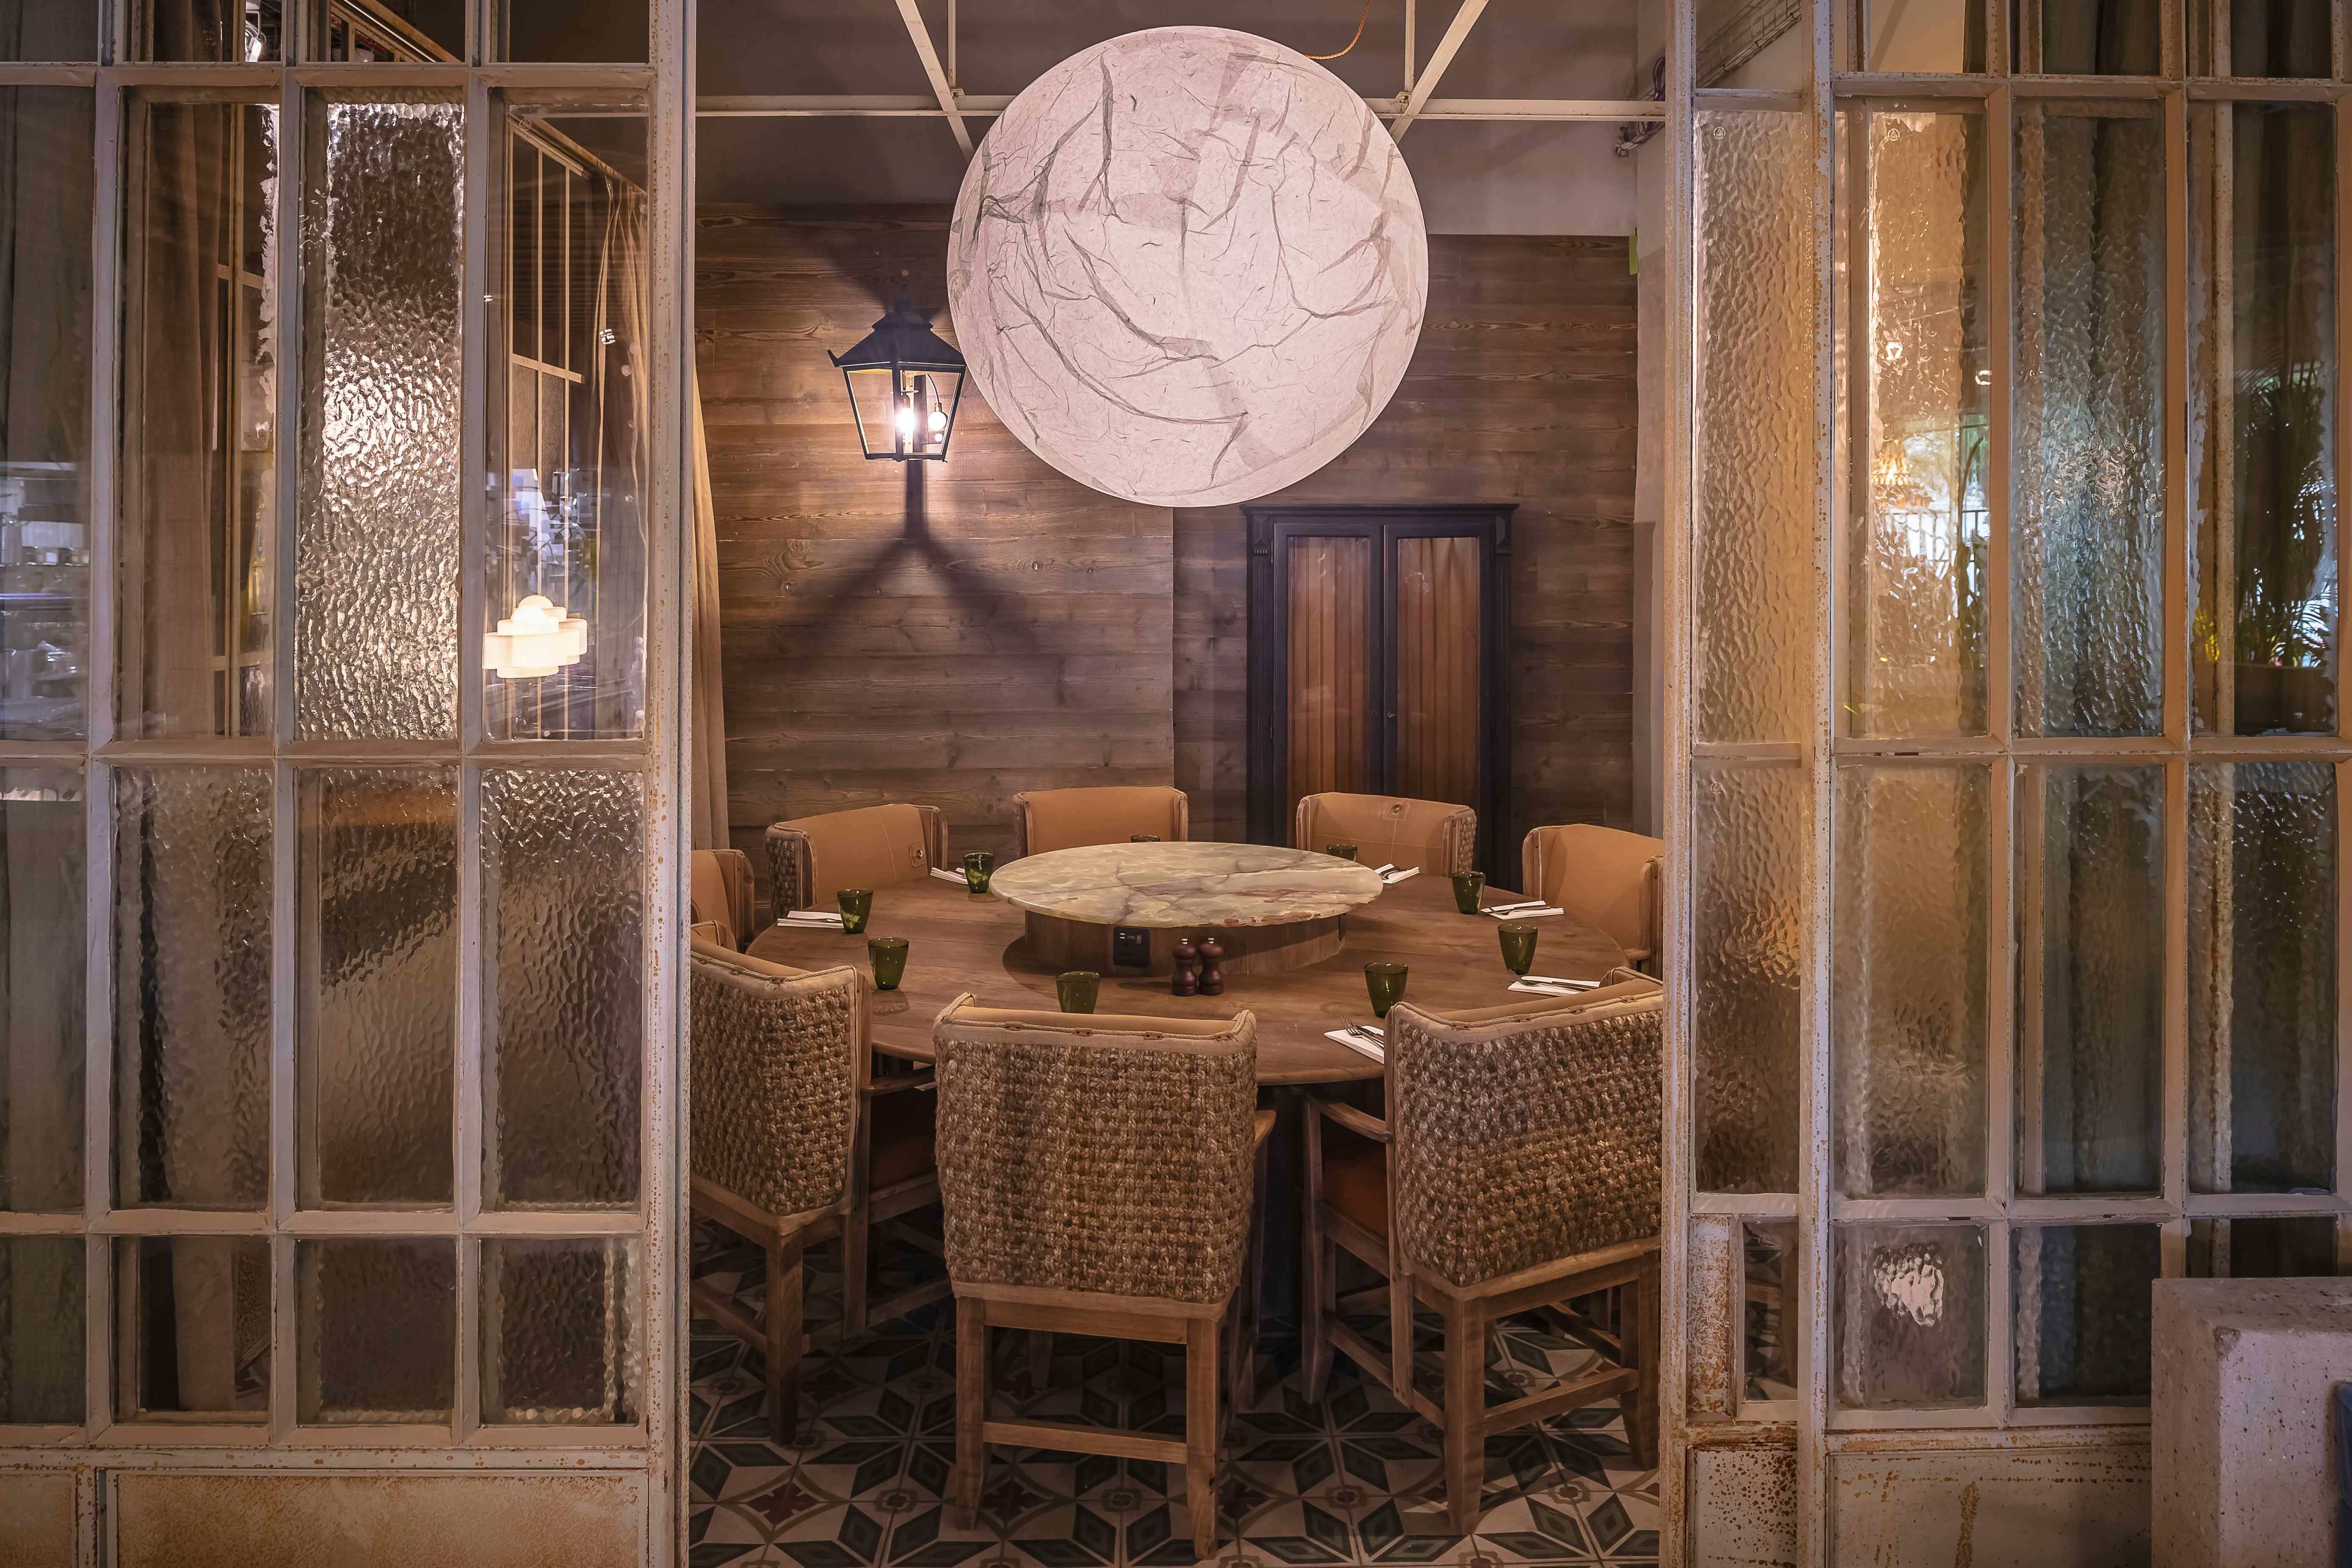 Private Dining Room - The Courtyard, Riding House Bloomsbury 